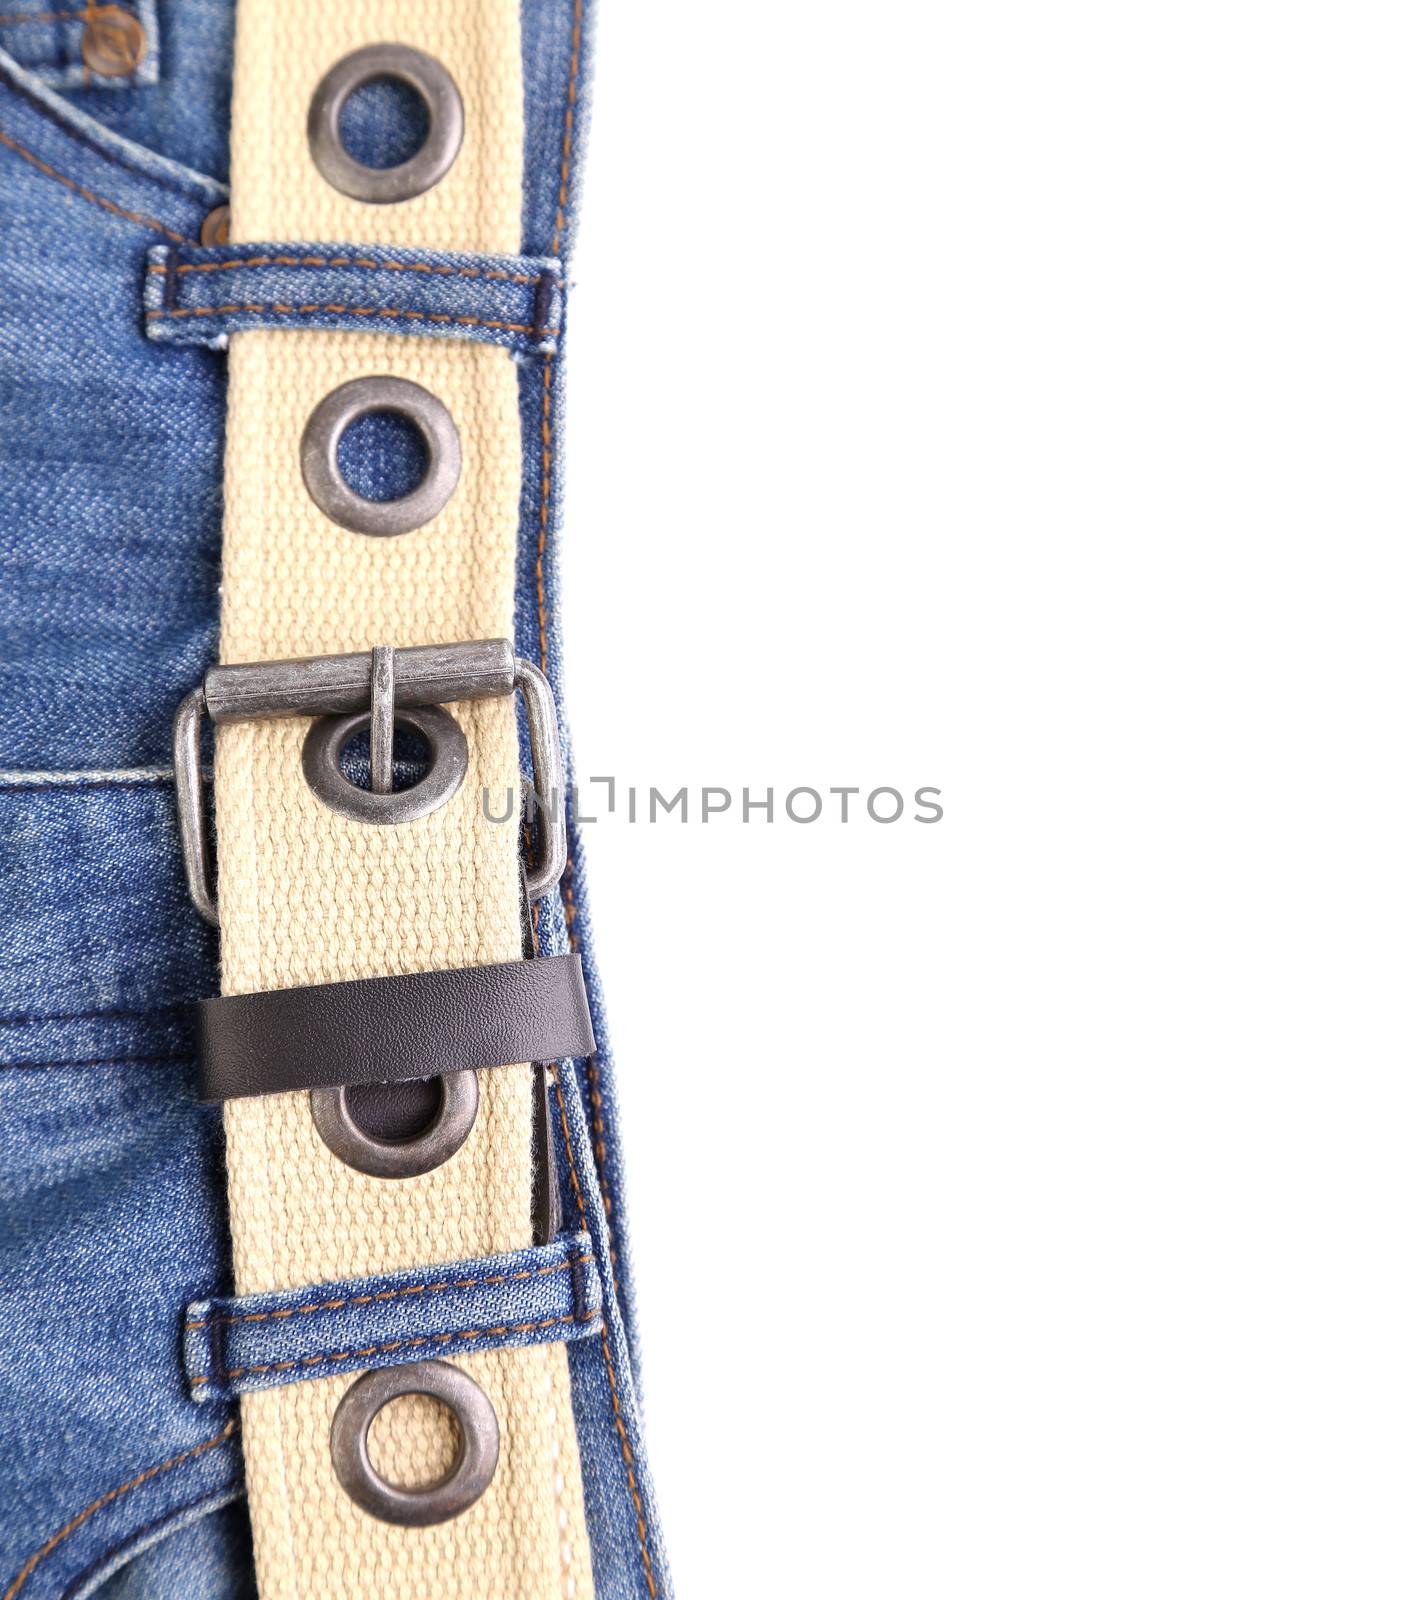 Blue jeans and leather belt are located left on the white background